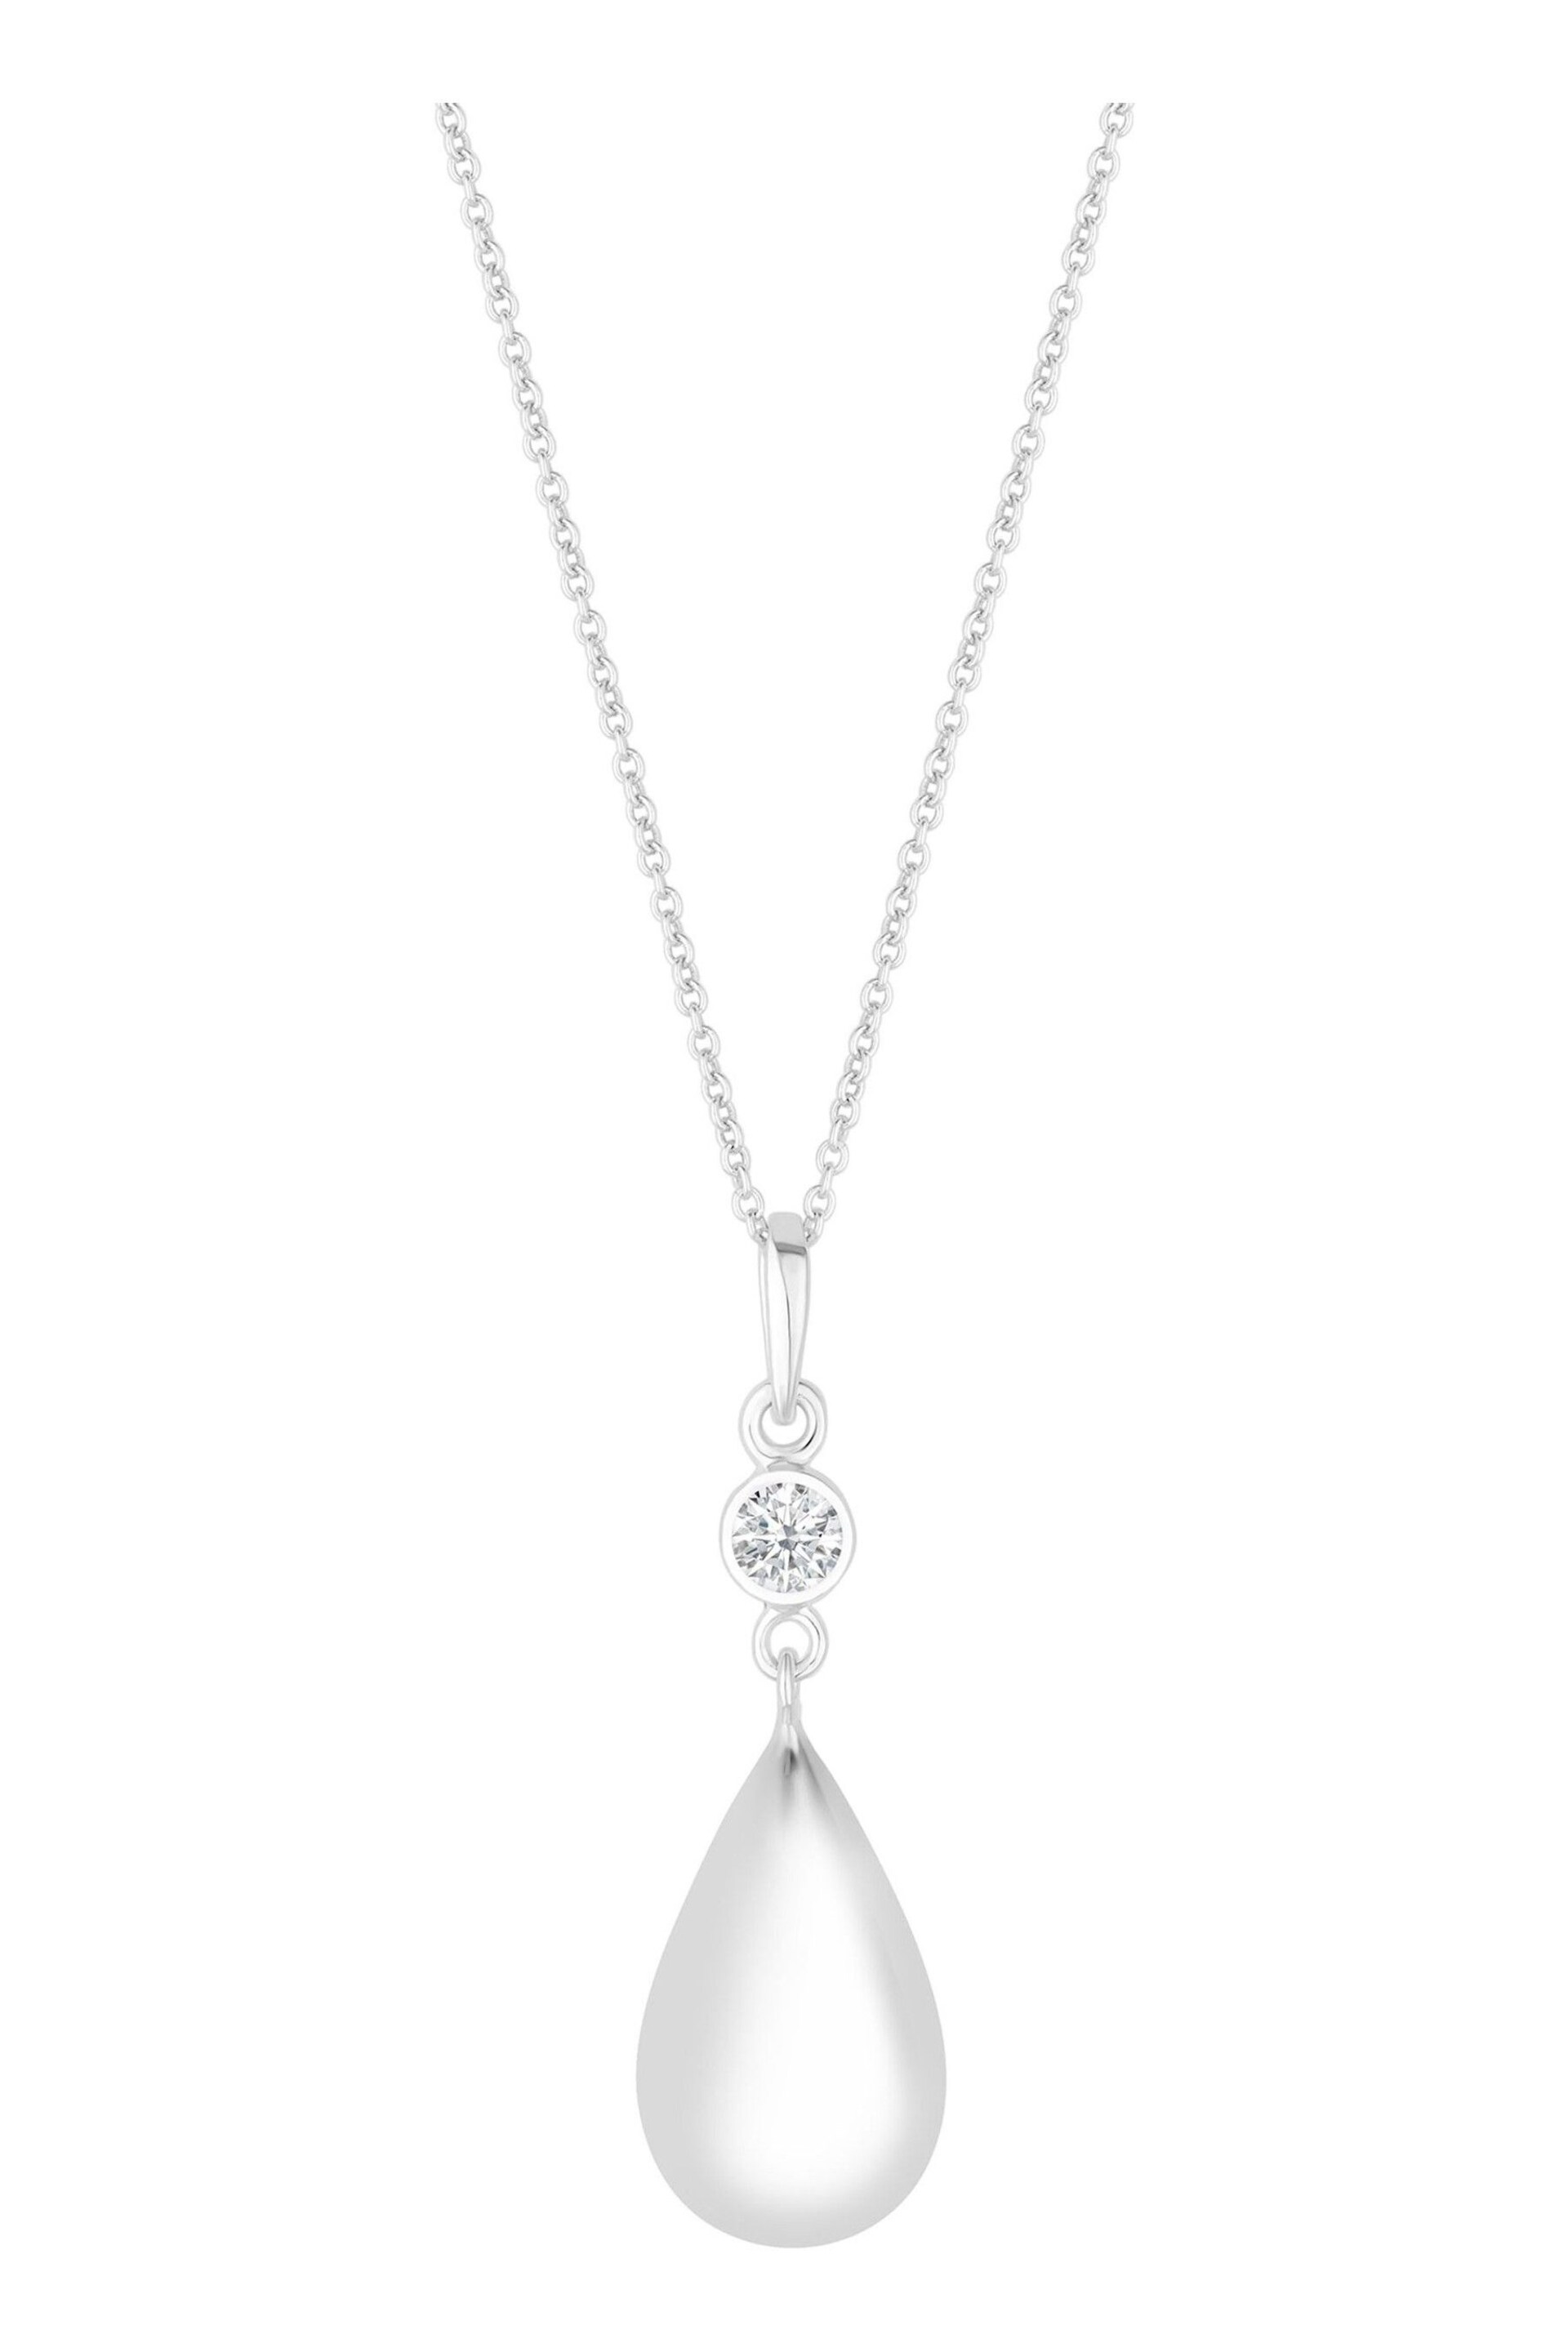 Simply Silver Silver Besel Polished Drop Pendant Necklace - Image 1 of 3